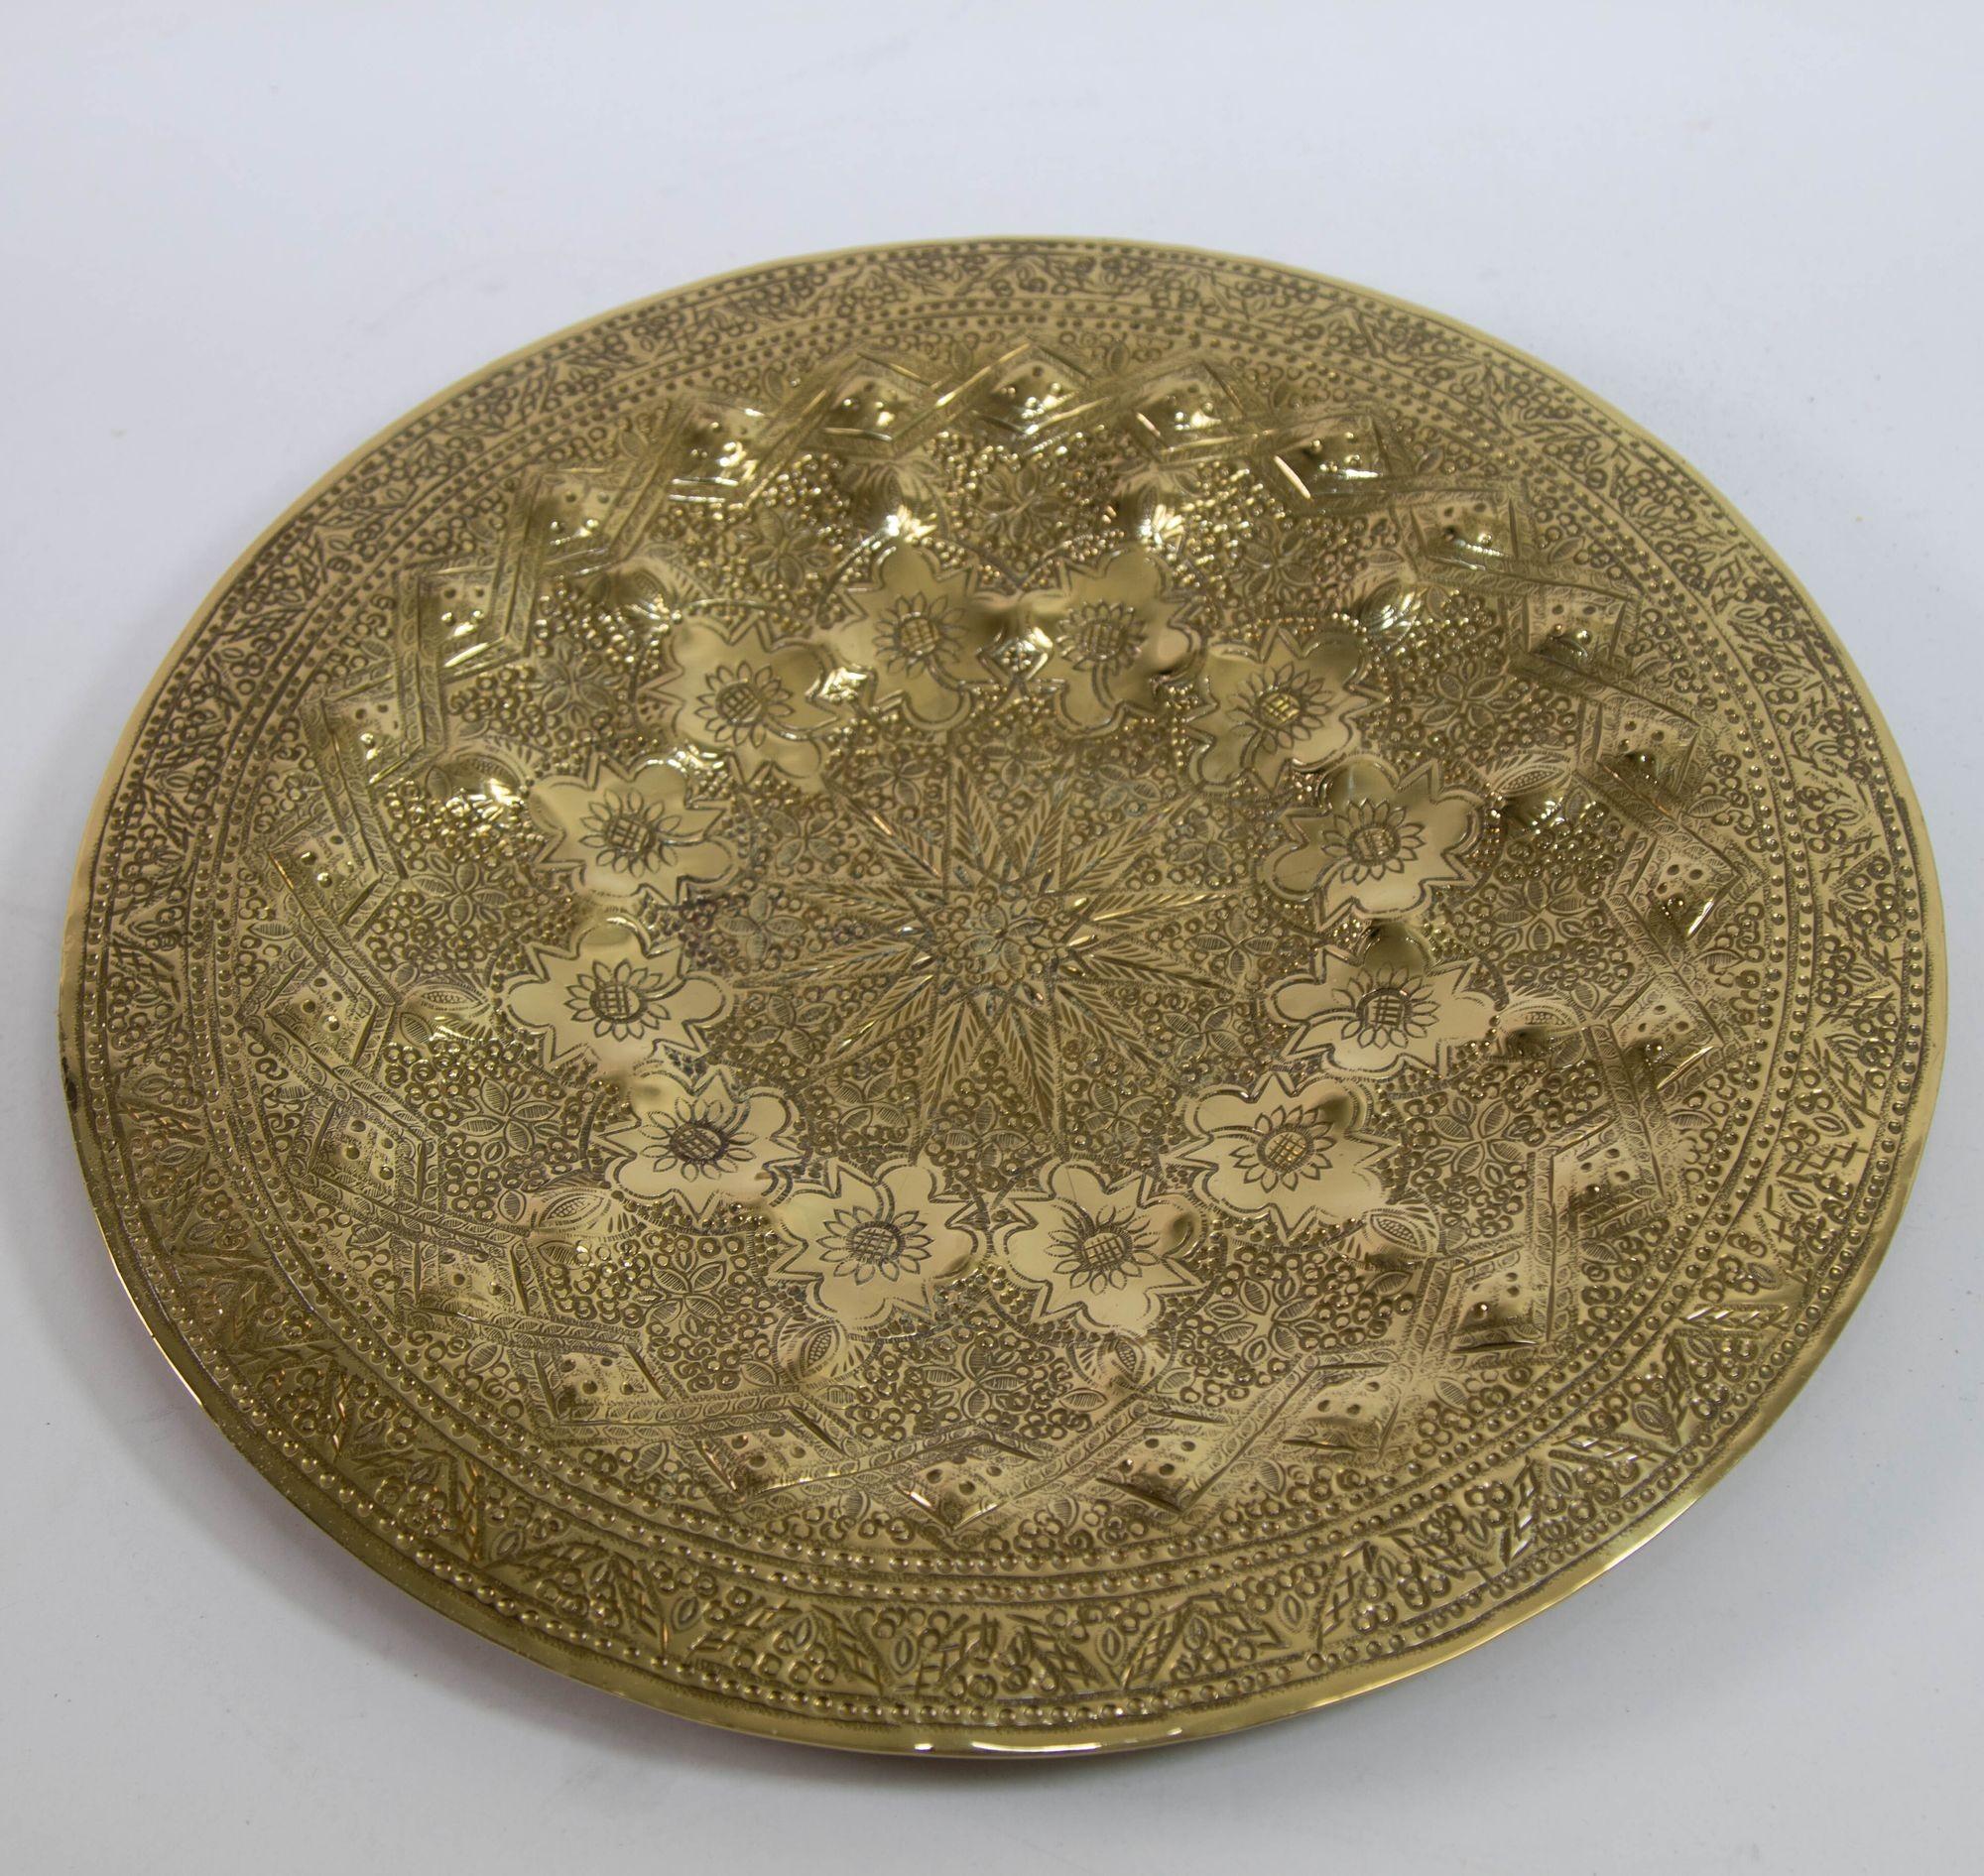 Islamic Persian Polished Brass Tray Collectible Metal Work Platter 10 inches D. For Sale 2